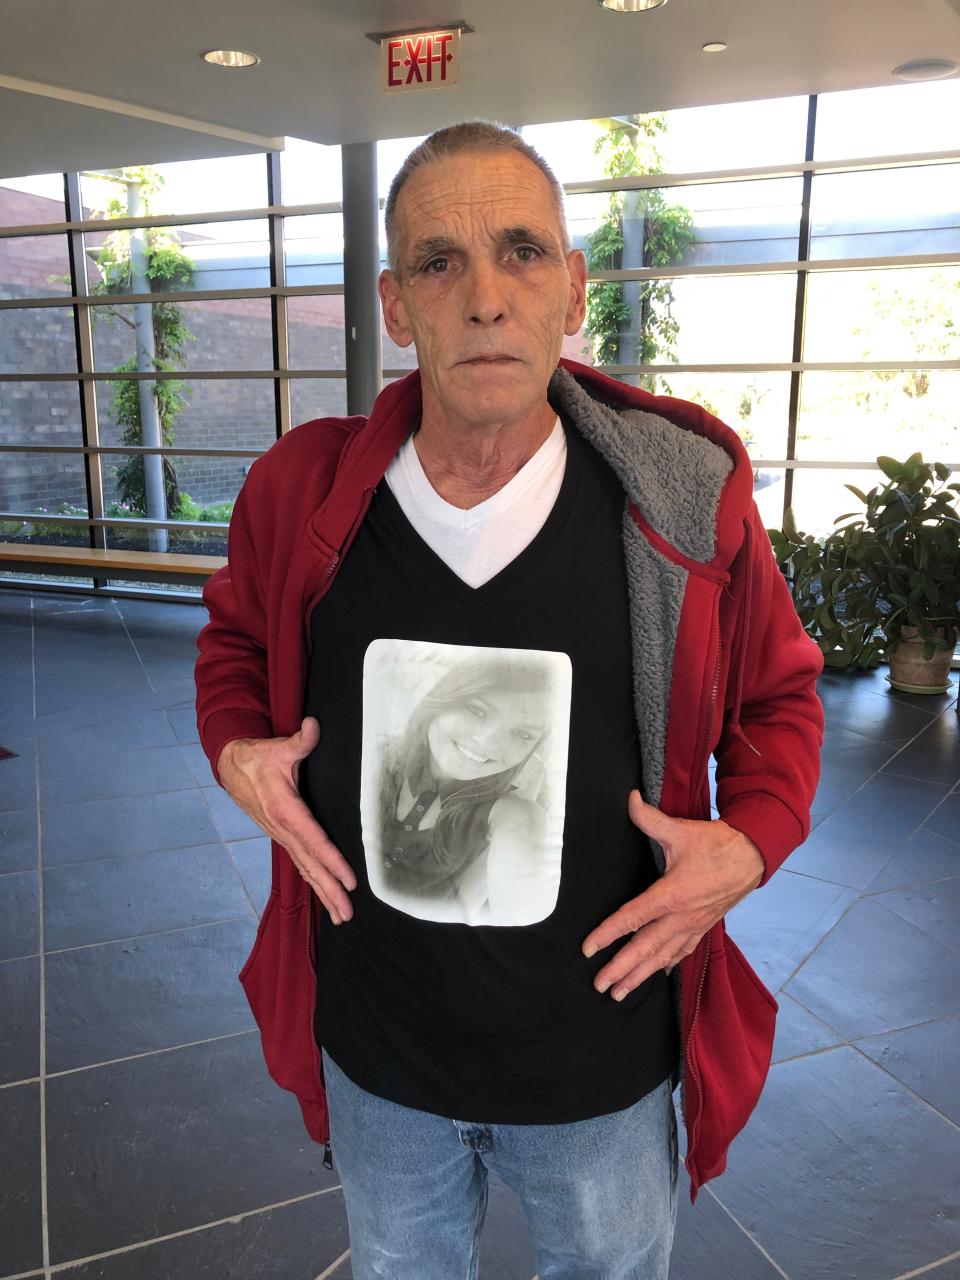 Paul Piccone shows his shirt which has a picture of his daughter, Lindsey Piccone. Lindsey Piccone, 21, of Bensalem, committed suicide after she was extorted for explicit photos in 2016, according to Bensalem police. Her family is pushing for legislation for harsher penalties for those who sexually extort someone, who then end up hurting themselves as a result.